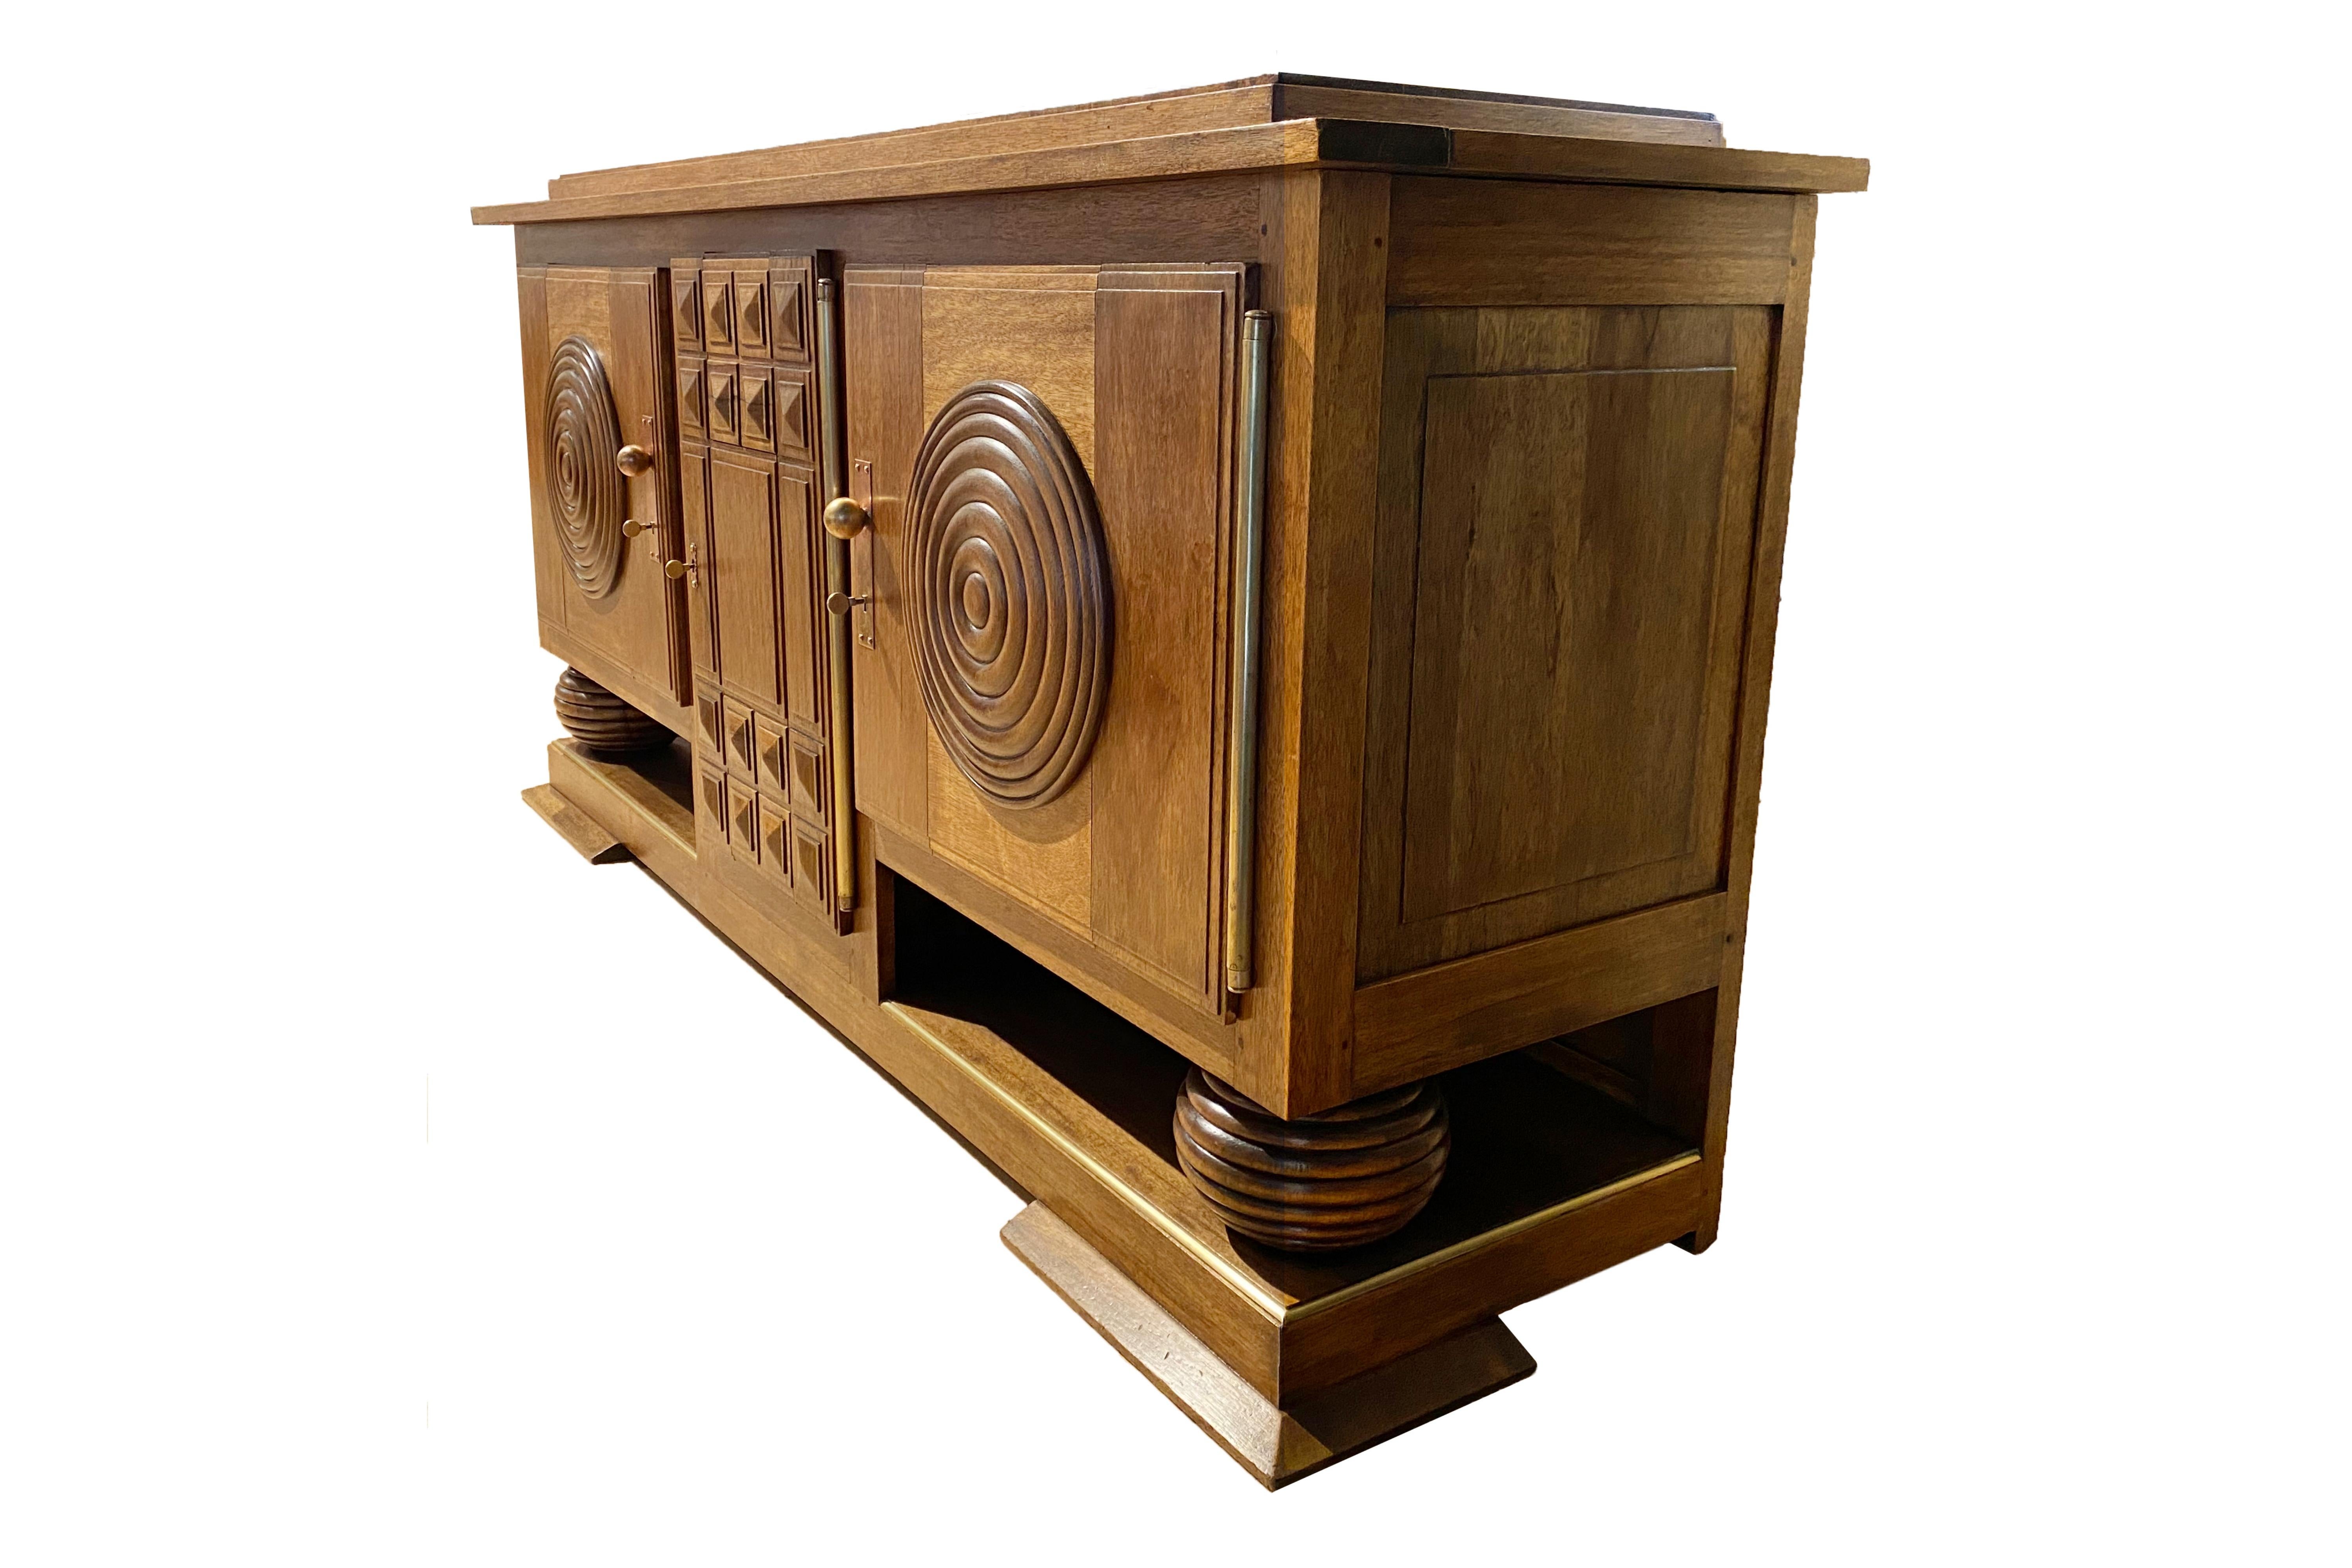 French Africanist Art Deco sideboard.
Made with solid walnut.
Brass details.
Three door sideboard.
The central door has 3 drawers.
Circa 1940, France.
Very good vintage condition.
Art Deco, sometimes referred to as Deco, is a style of visual